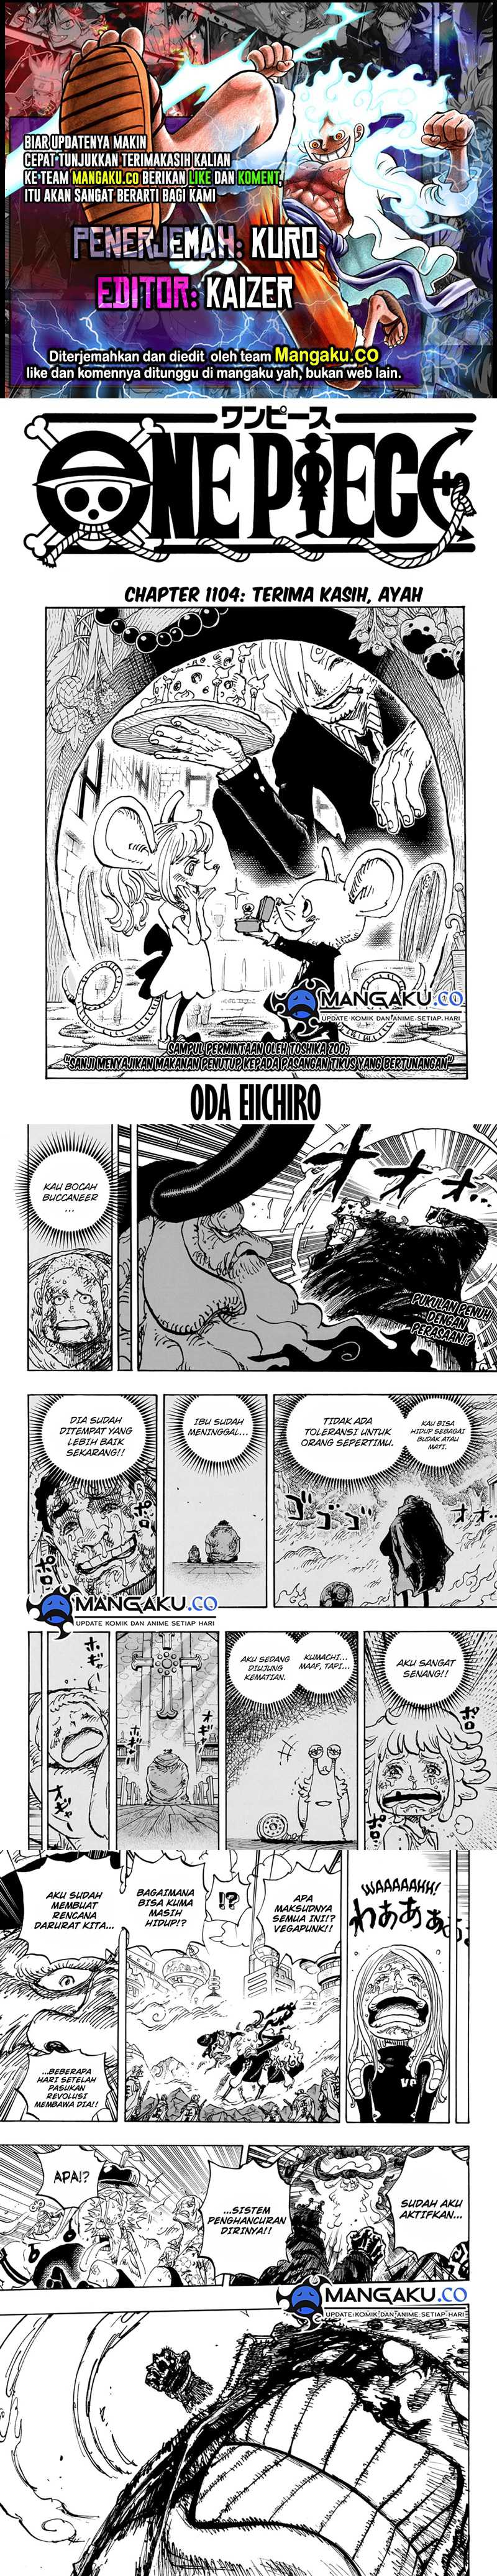 One Piece: Chapter 1104 - Page 1